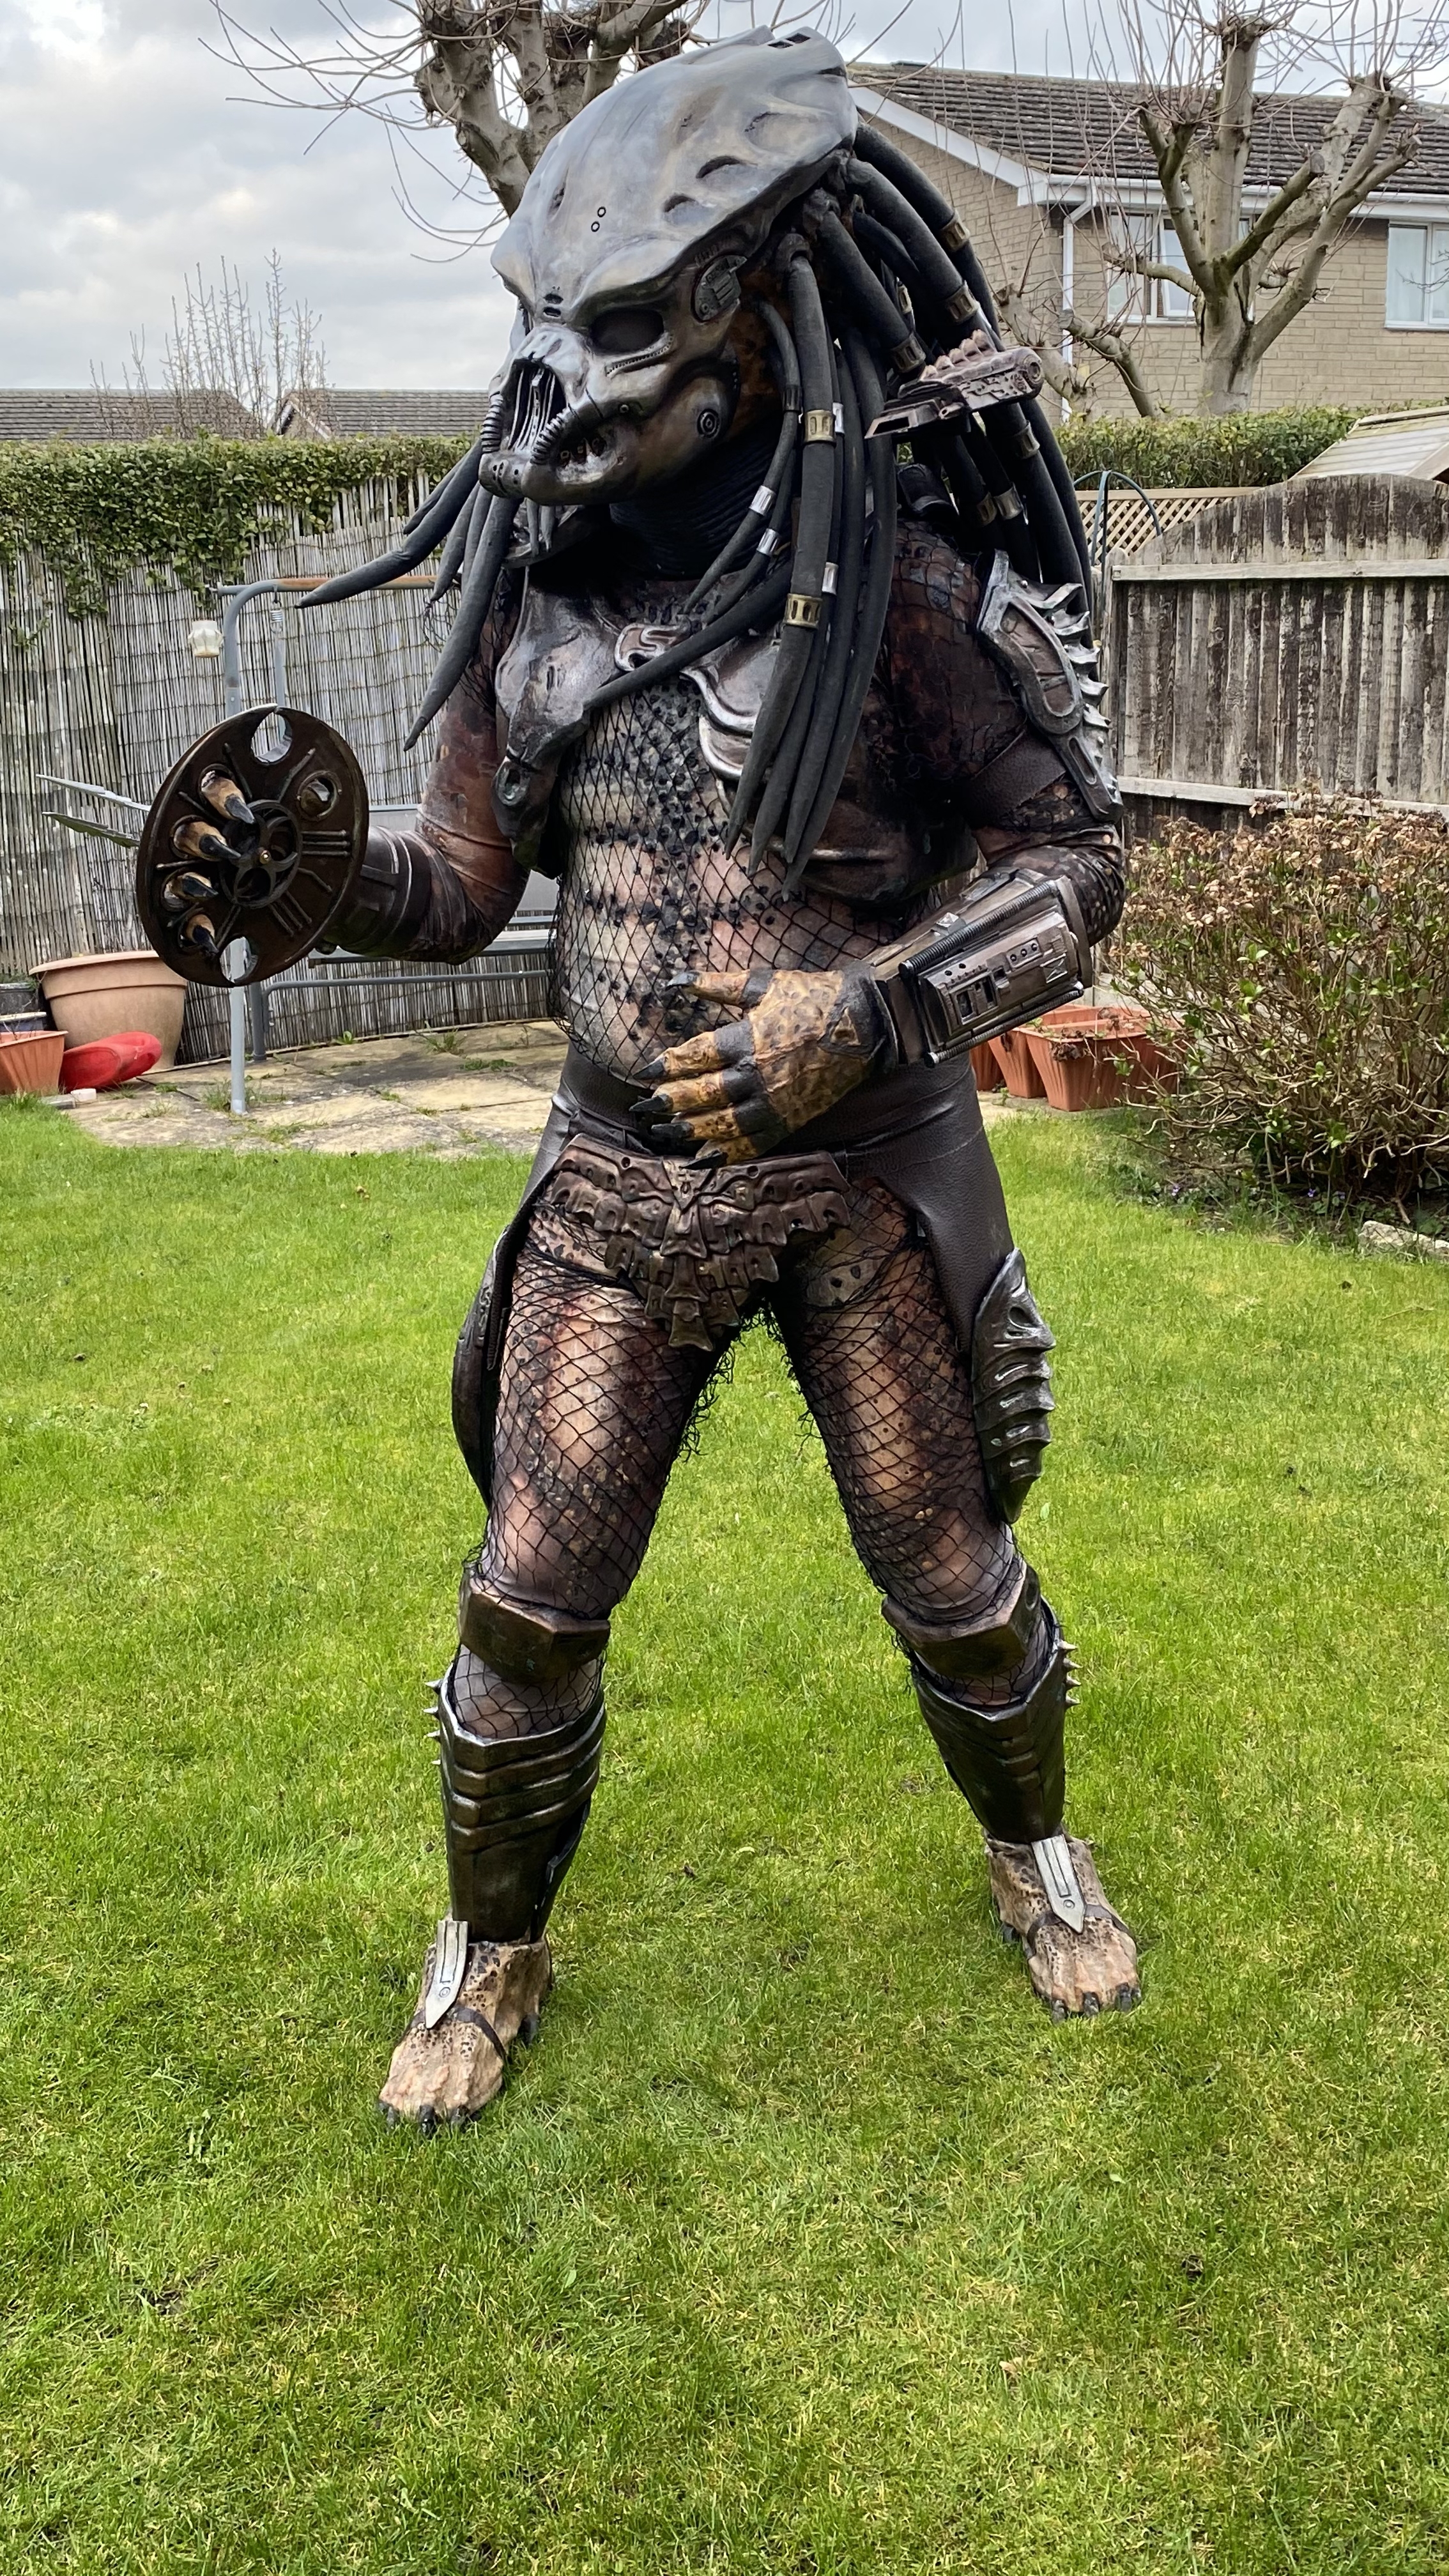 My P1 Themed Predator Costume with Electronics and Sounds. (Pic Heavy)